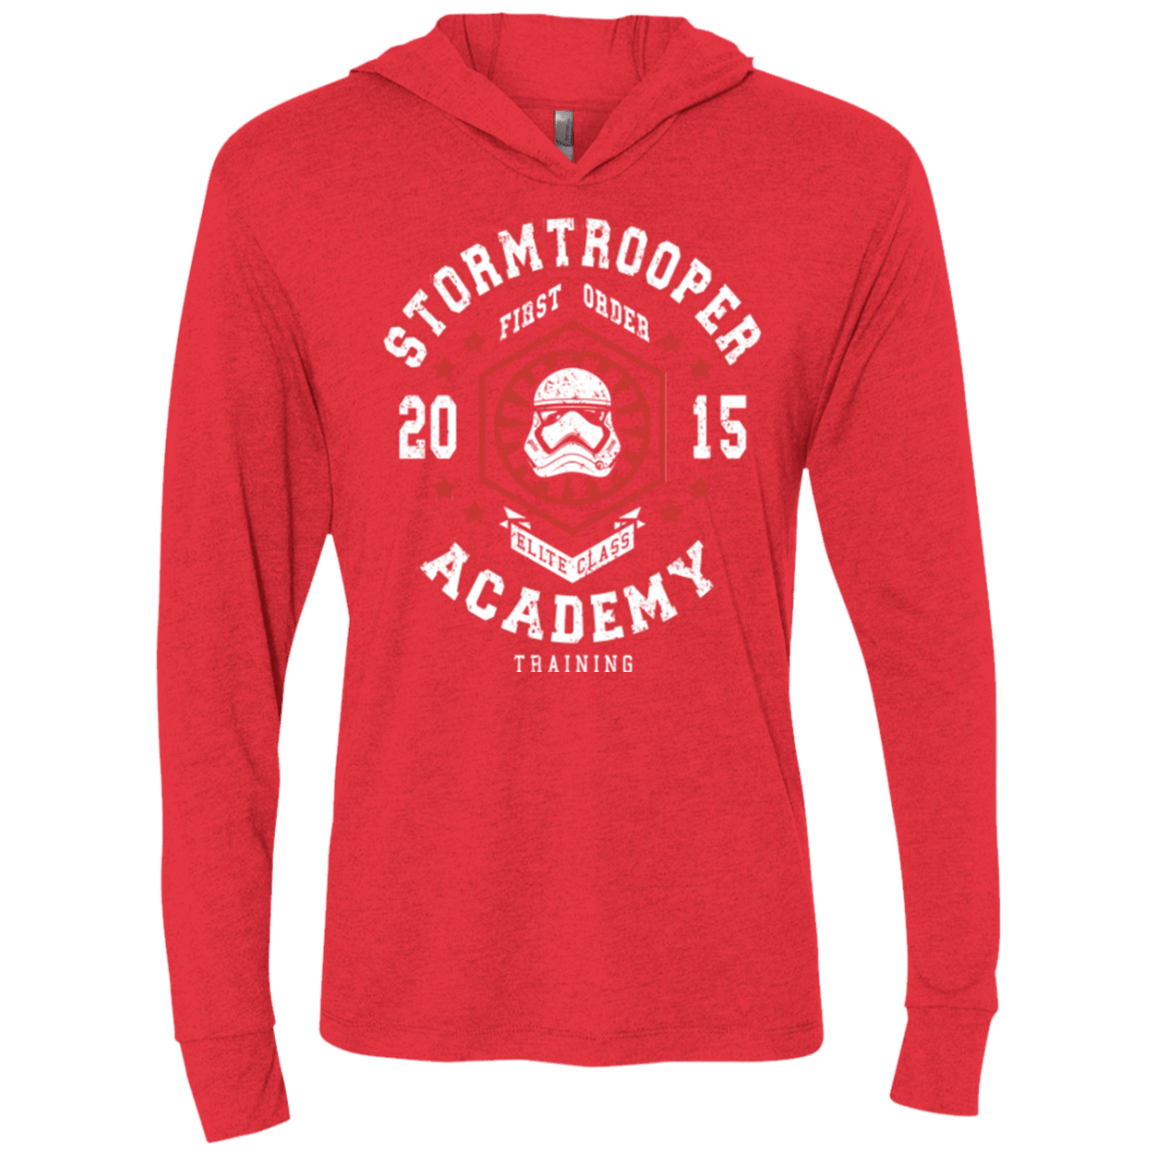 T-Shirts Vintage Red / X-Small Stormtrooper Academy 15 Triblend Long Sleeve Hoodie Tee